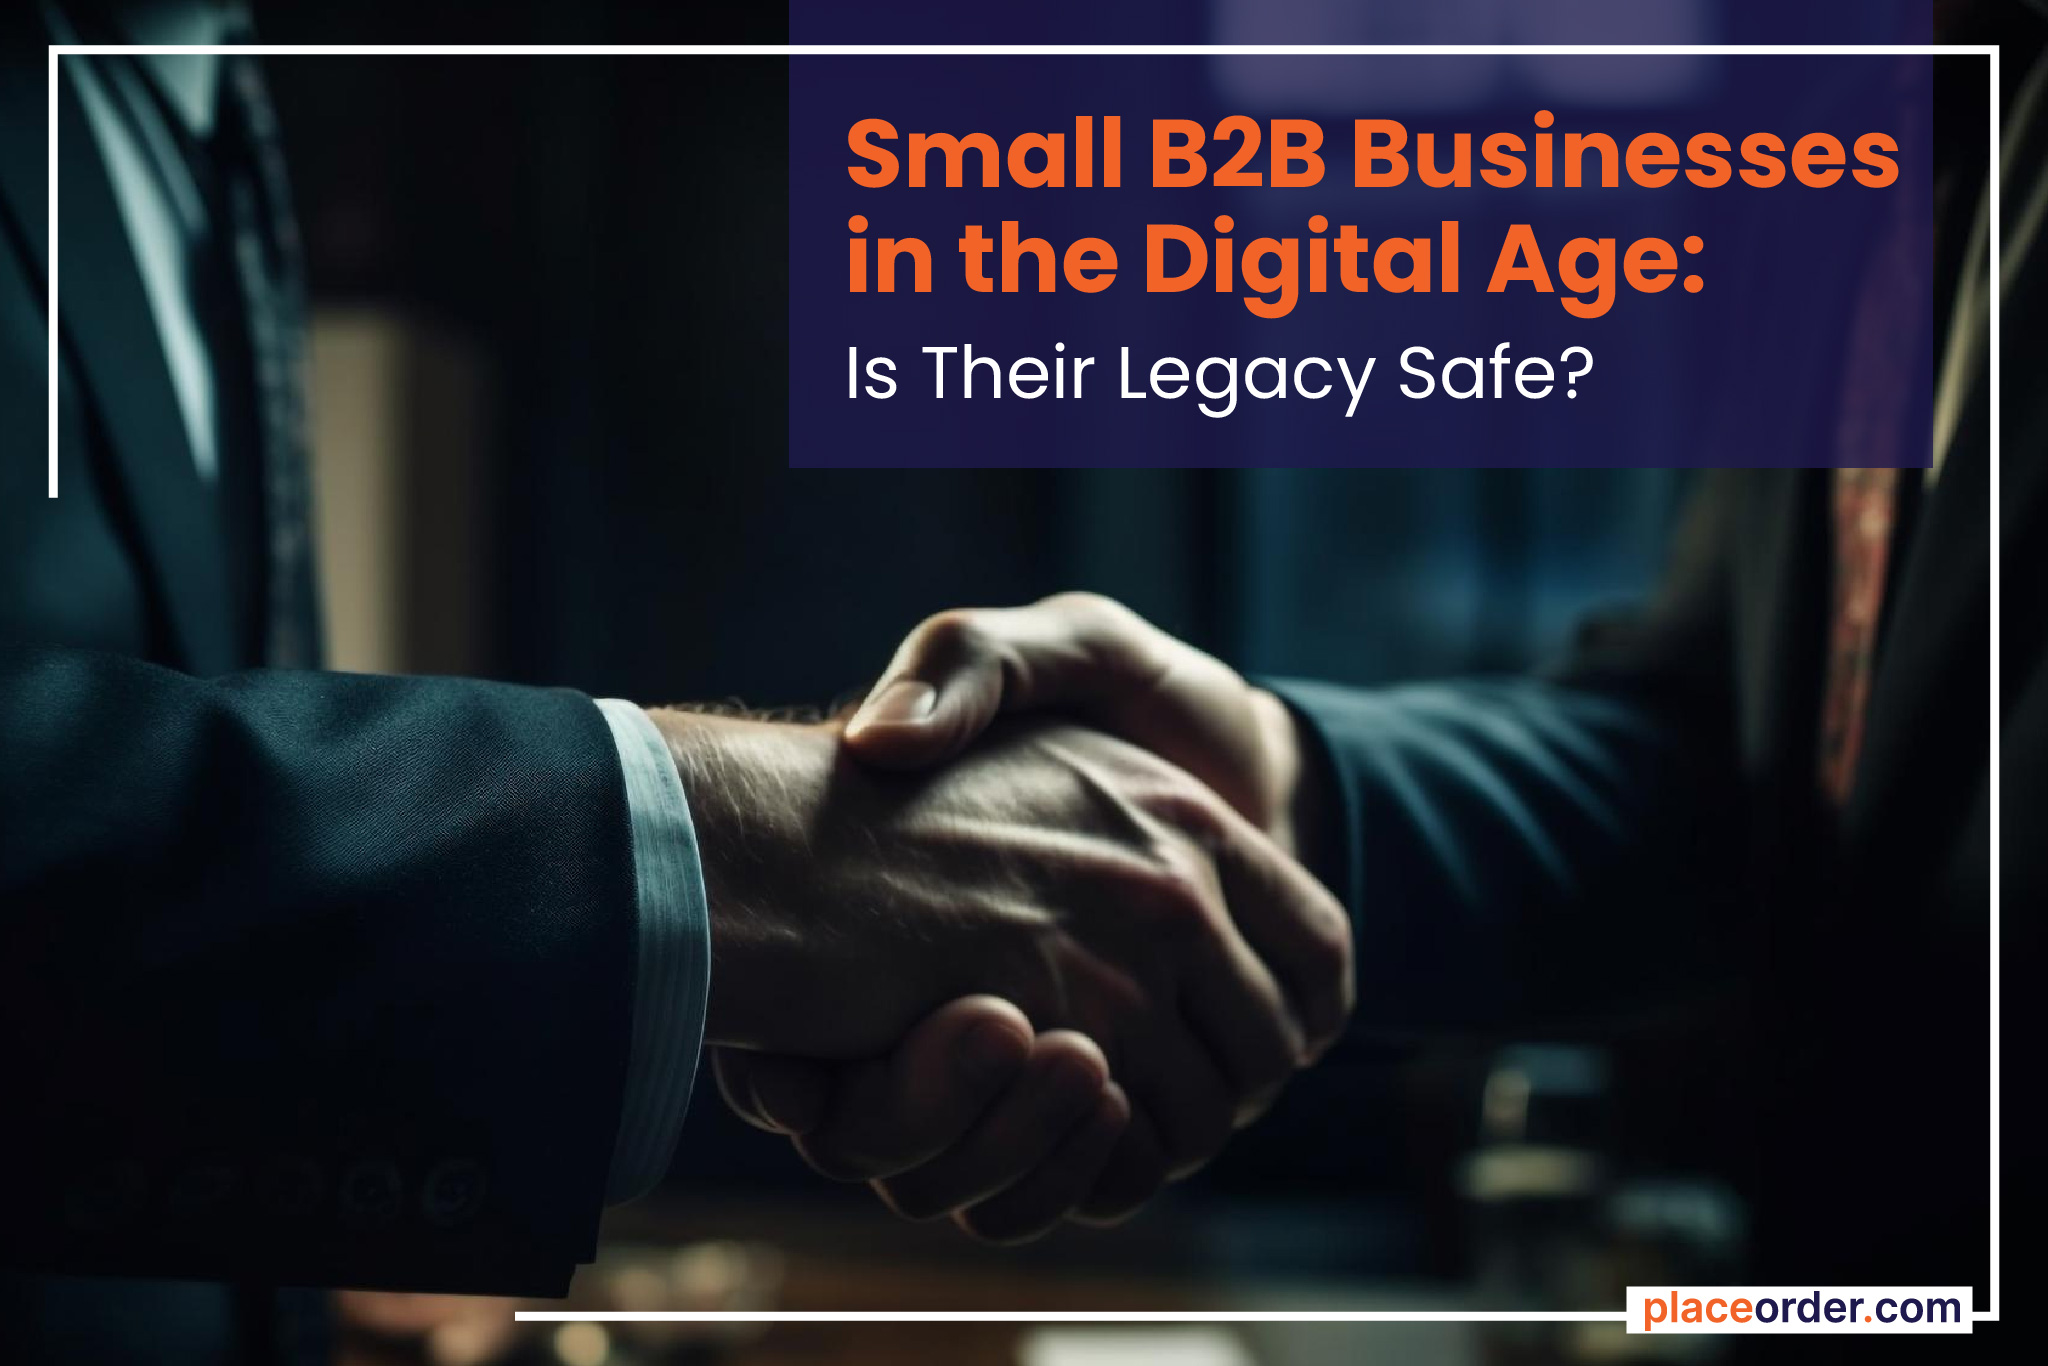 Small B2B Businesses in the Digital Age: Is Their Legacy Safe?